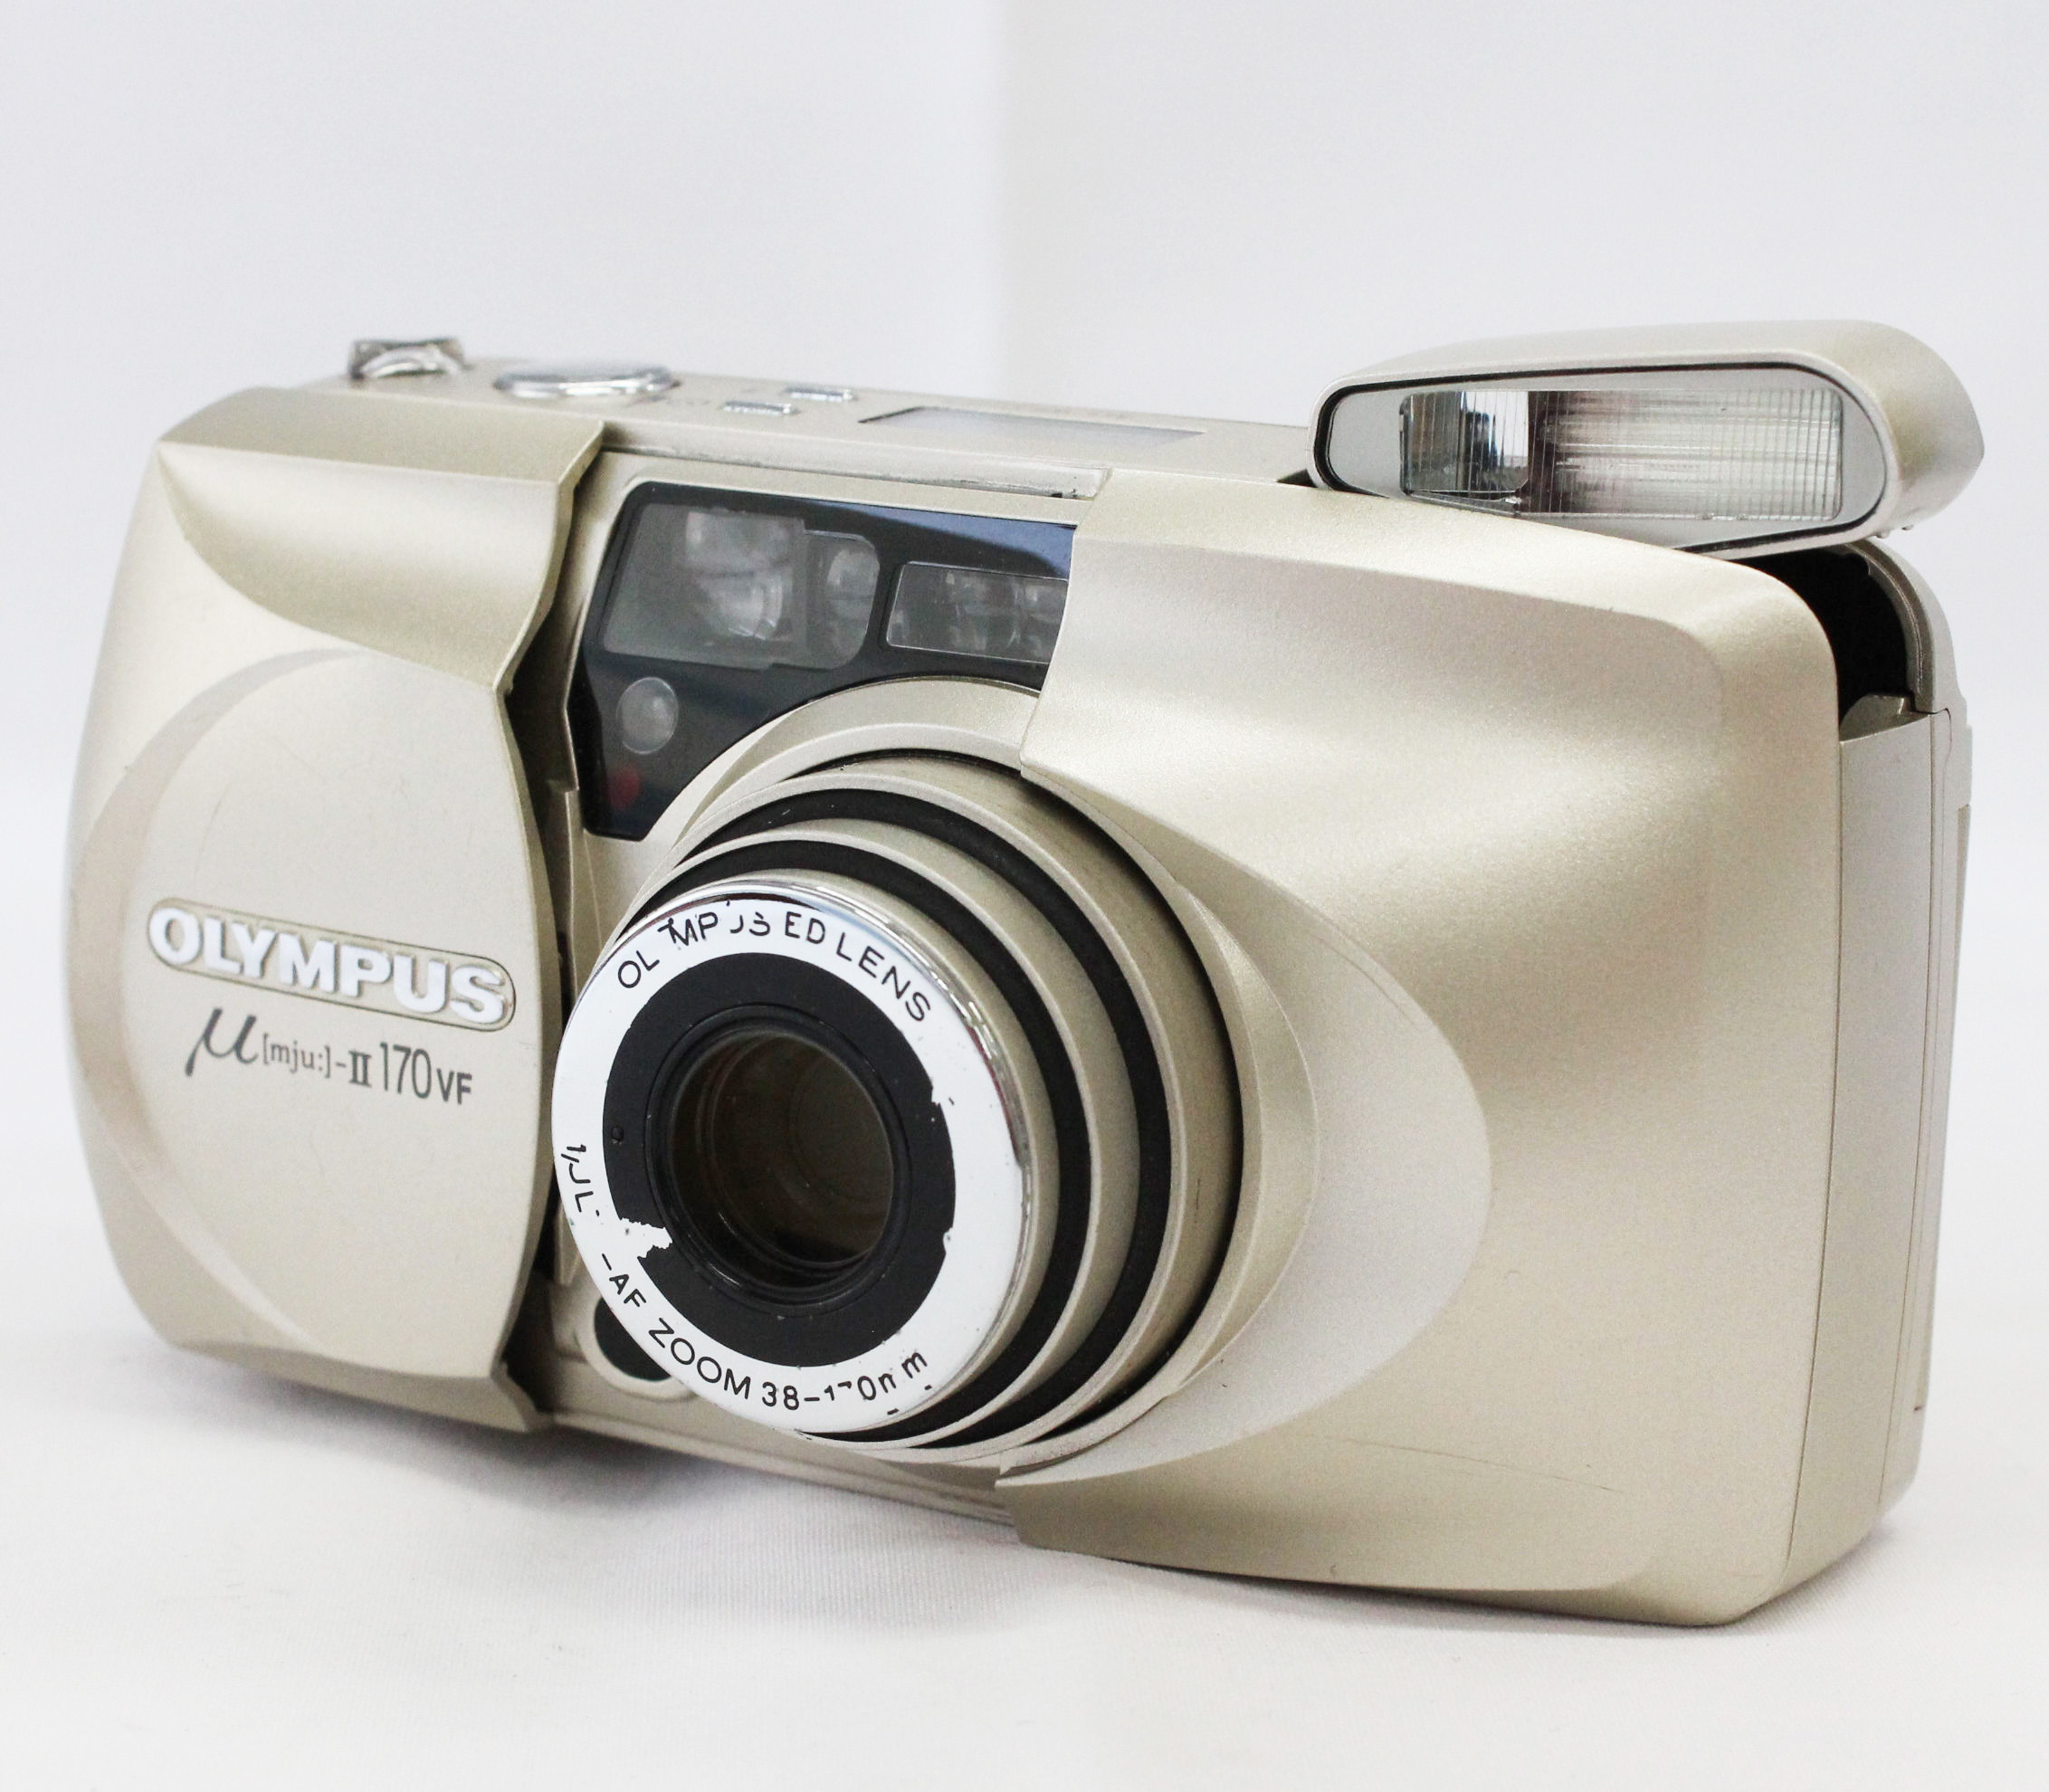 [Exc+++++] Olympus μ MJU II 170 VF Multi-AF Zoom 35mm Point & Shoot Film Camera with Remote Control RC-300C from Japan